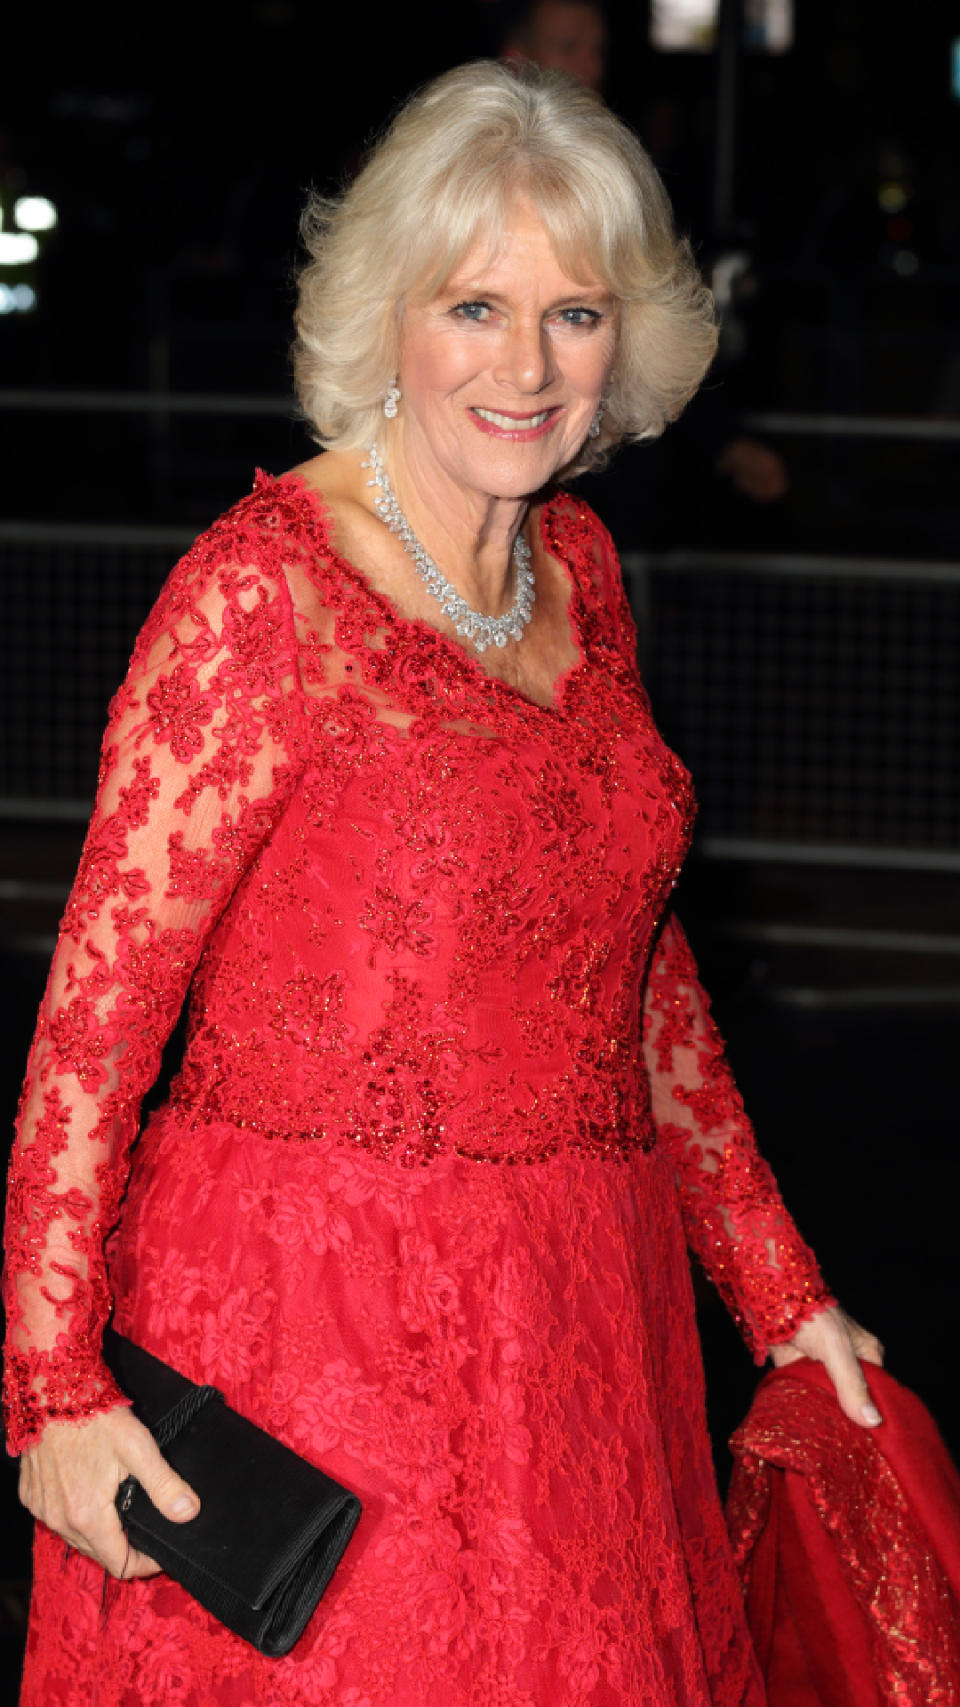 <p> Duchess of Cornwall attended the Annual Royal Variety Performance in a vibrant red dress. A fan of opulent fabric, this full lace gown makes for a glamorous choice for this special event, which the former Duchess of Cornwall attended alongside husband King Charles in a smart suit. </p>